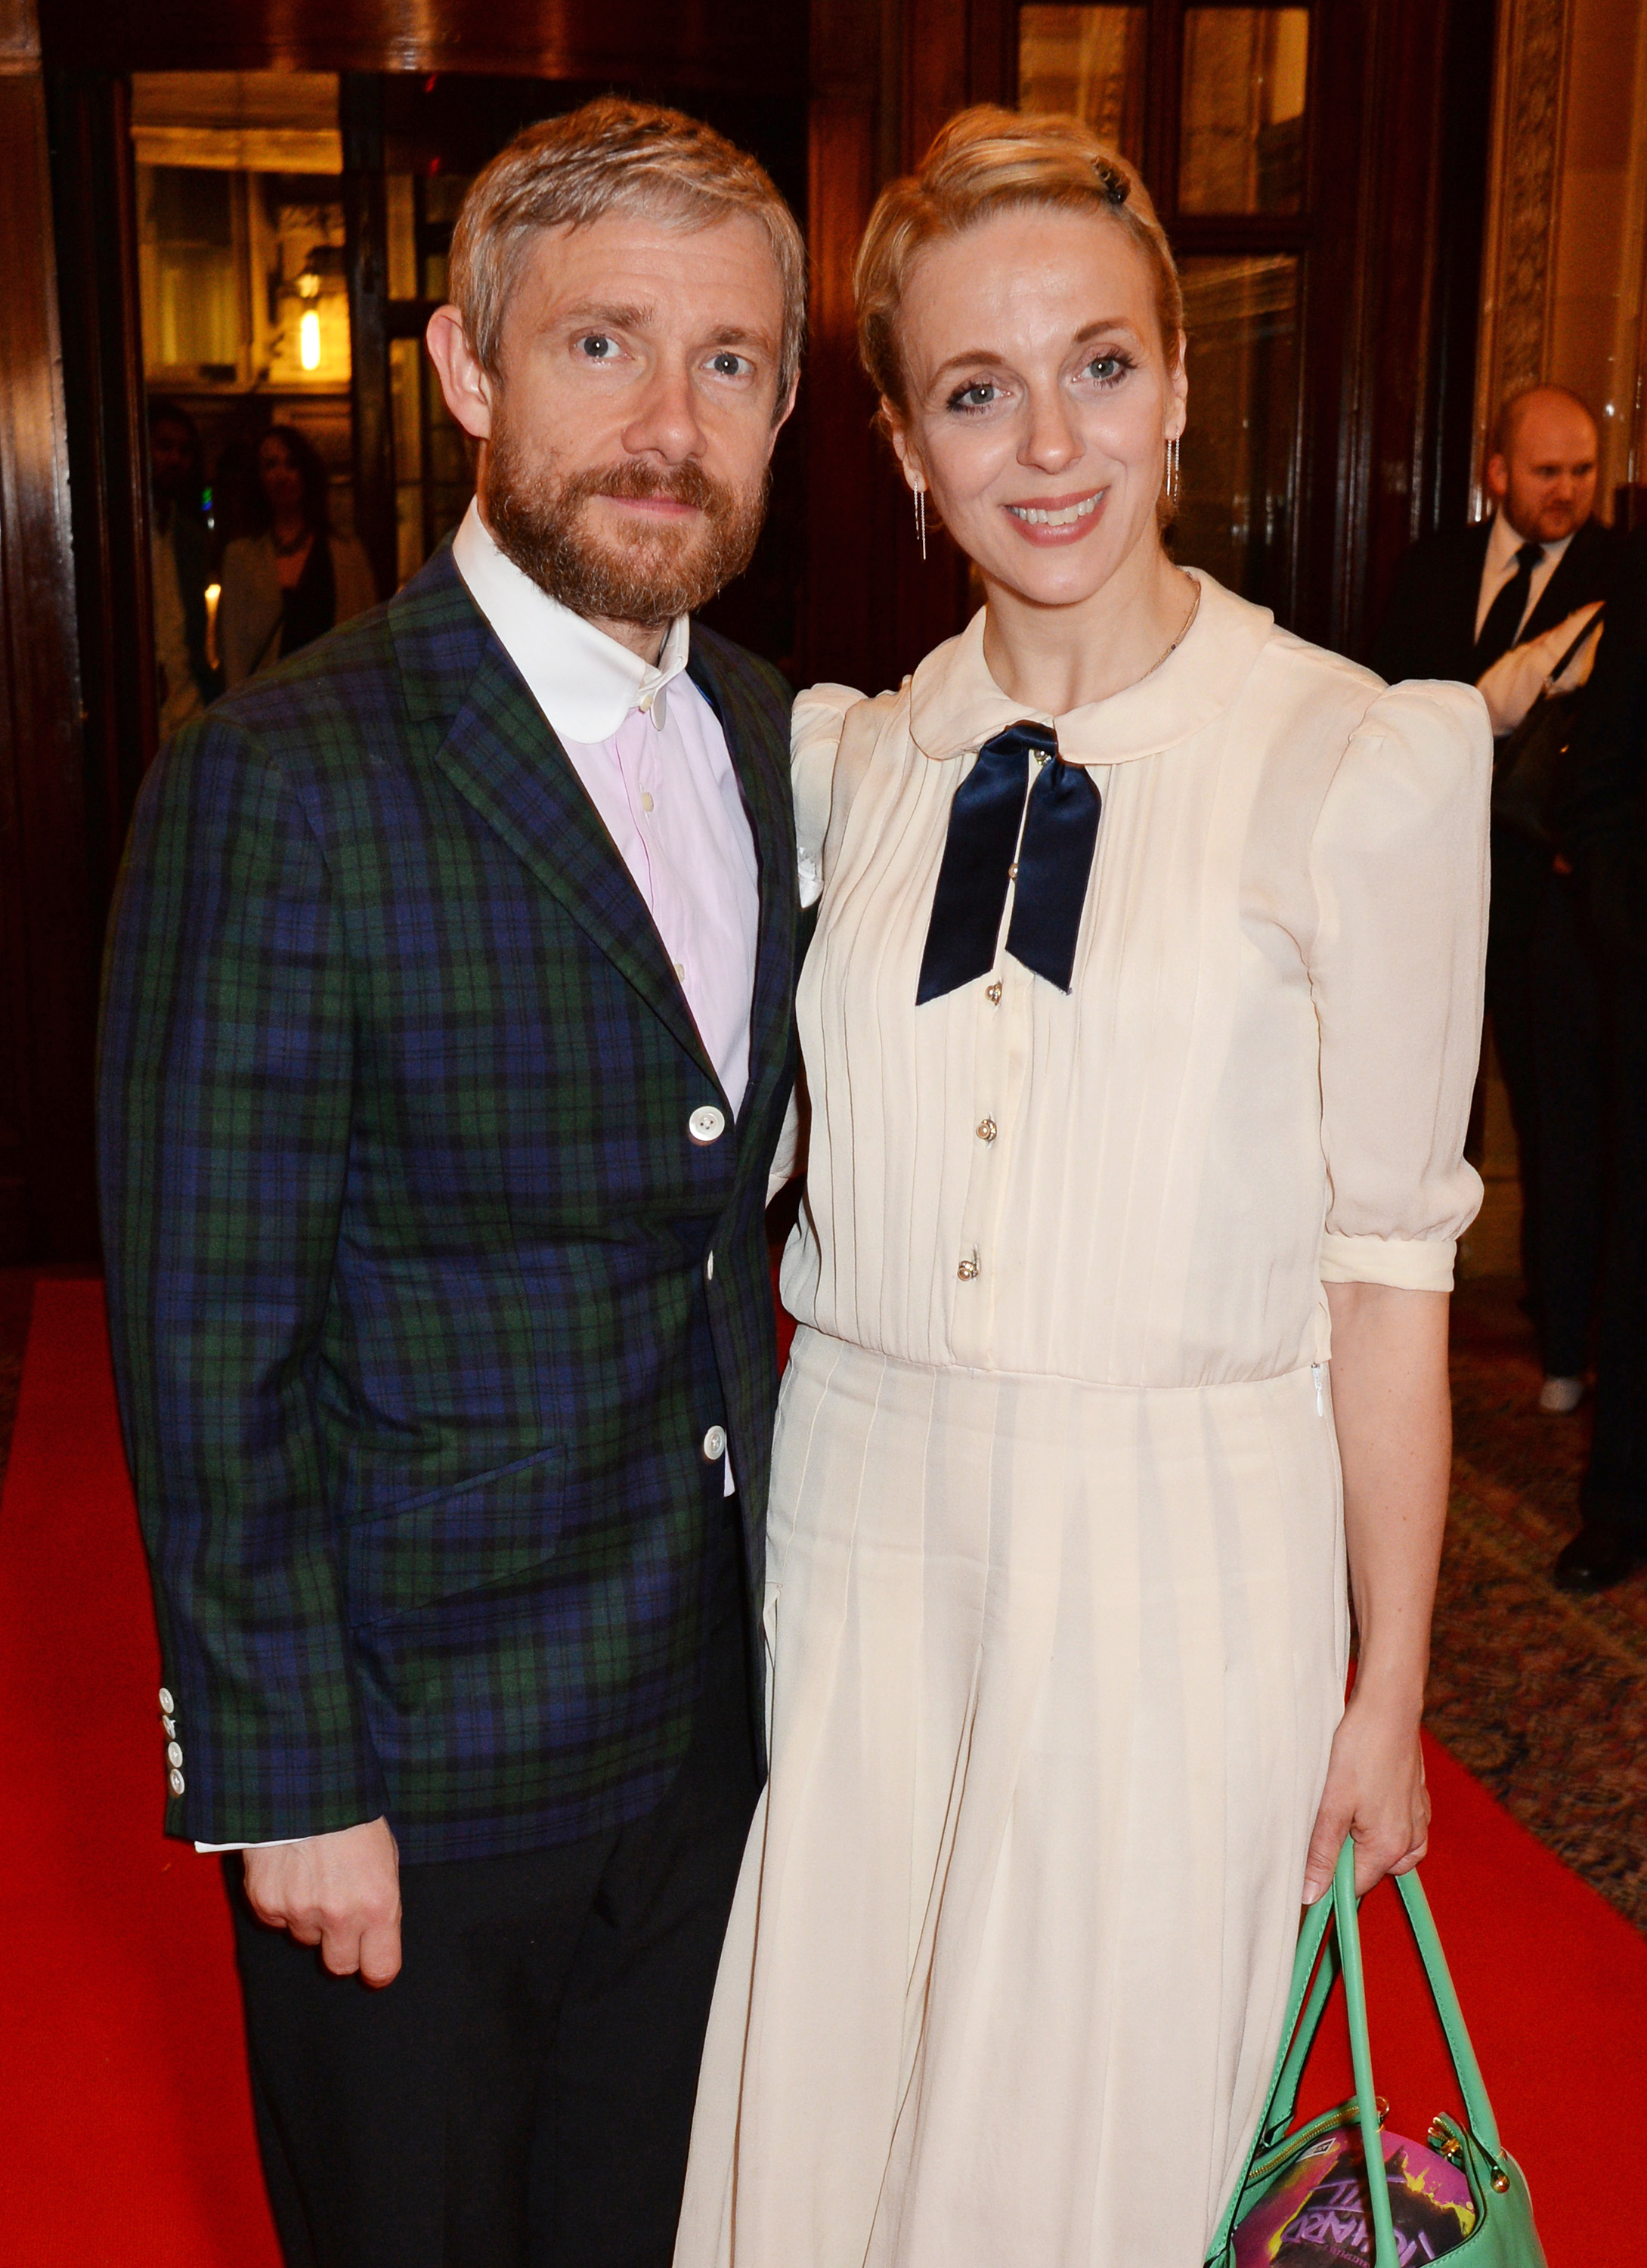 Martin Freeman and Amanda Abbington pose at an after party celebrating the Gala Night performance of "Richard III", playing at the Trafalgar Studios, at One Whitehall Place on July 9, 2014, in London, England | Source: Getty Images